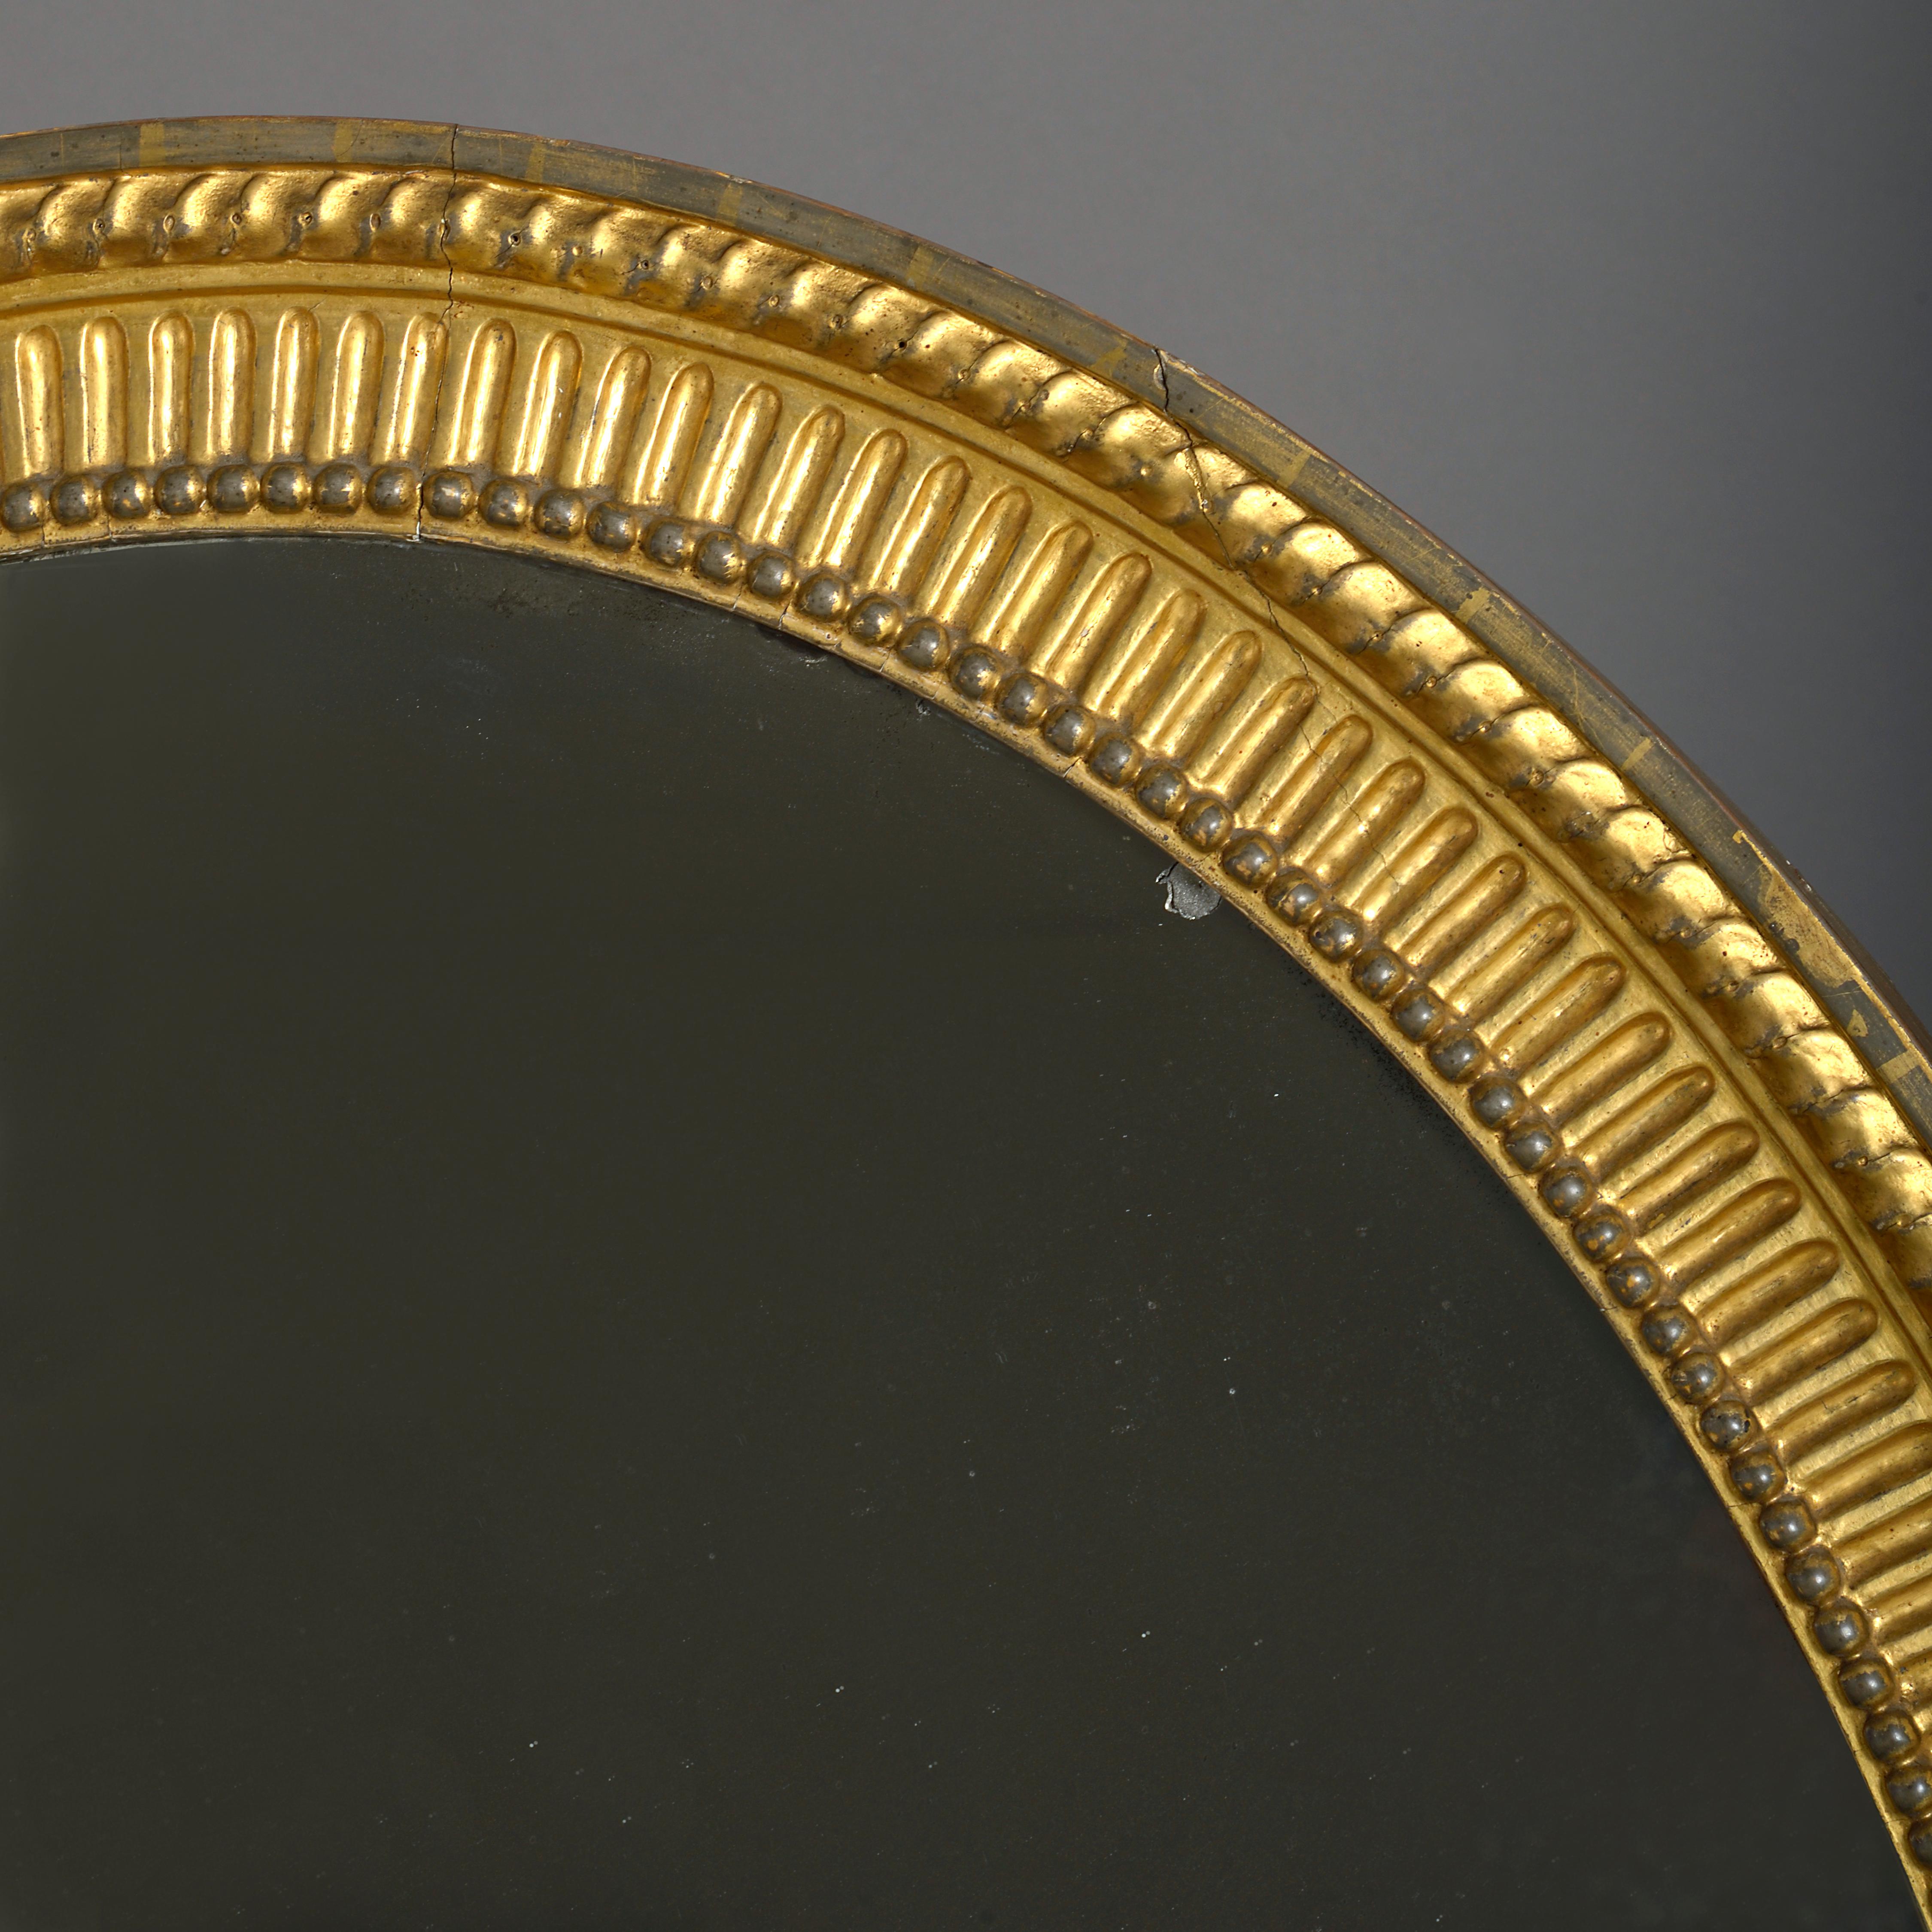 A fine George III carved giltwood oval mirror, circa 1780.

With original plate, the reeded frame carved with guilloche and beads.